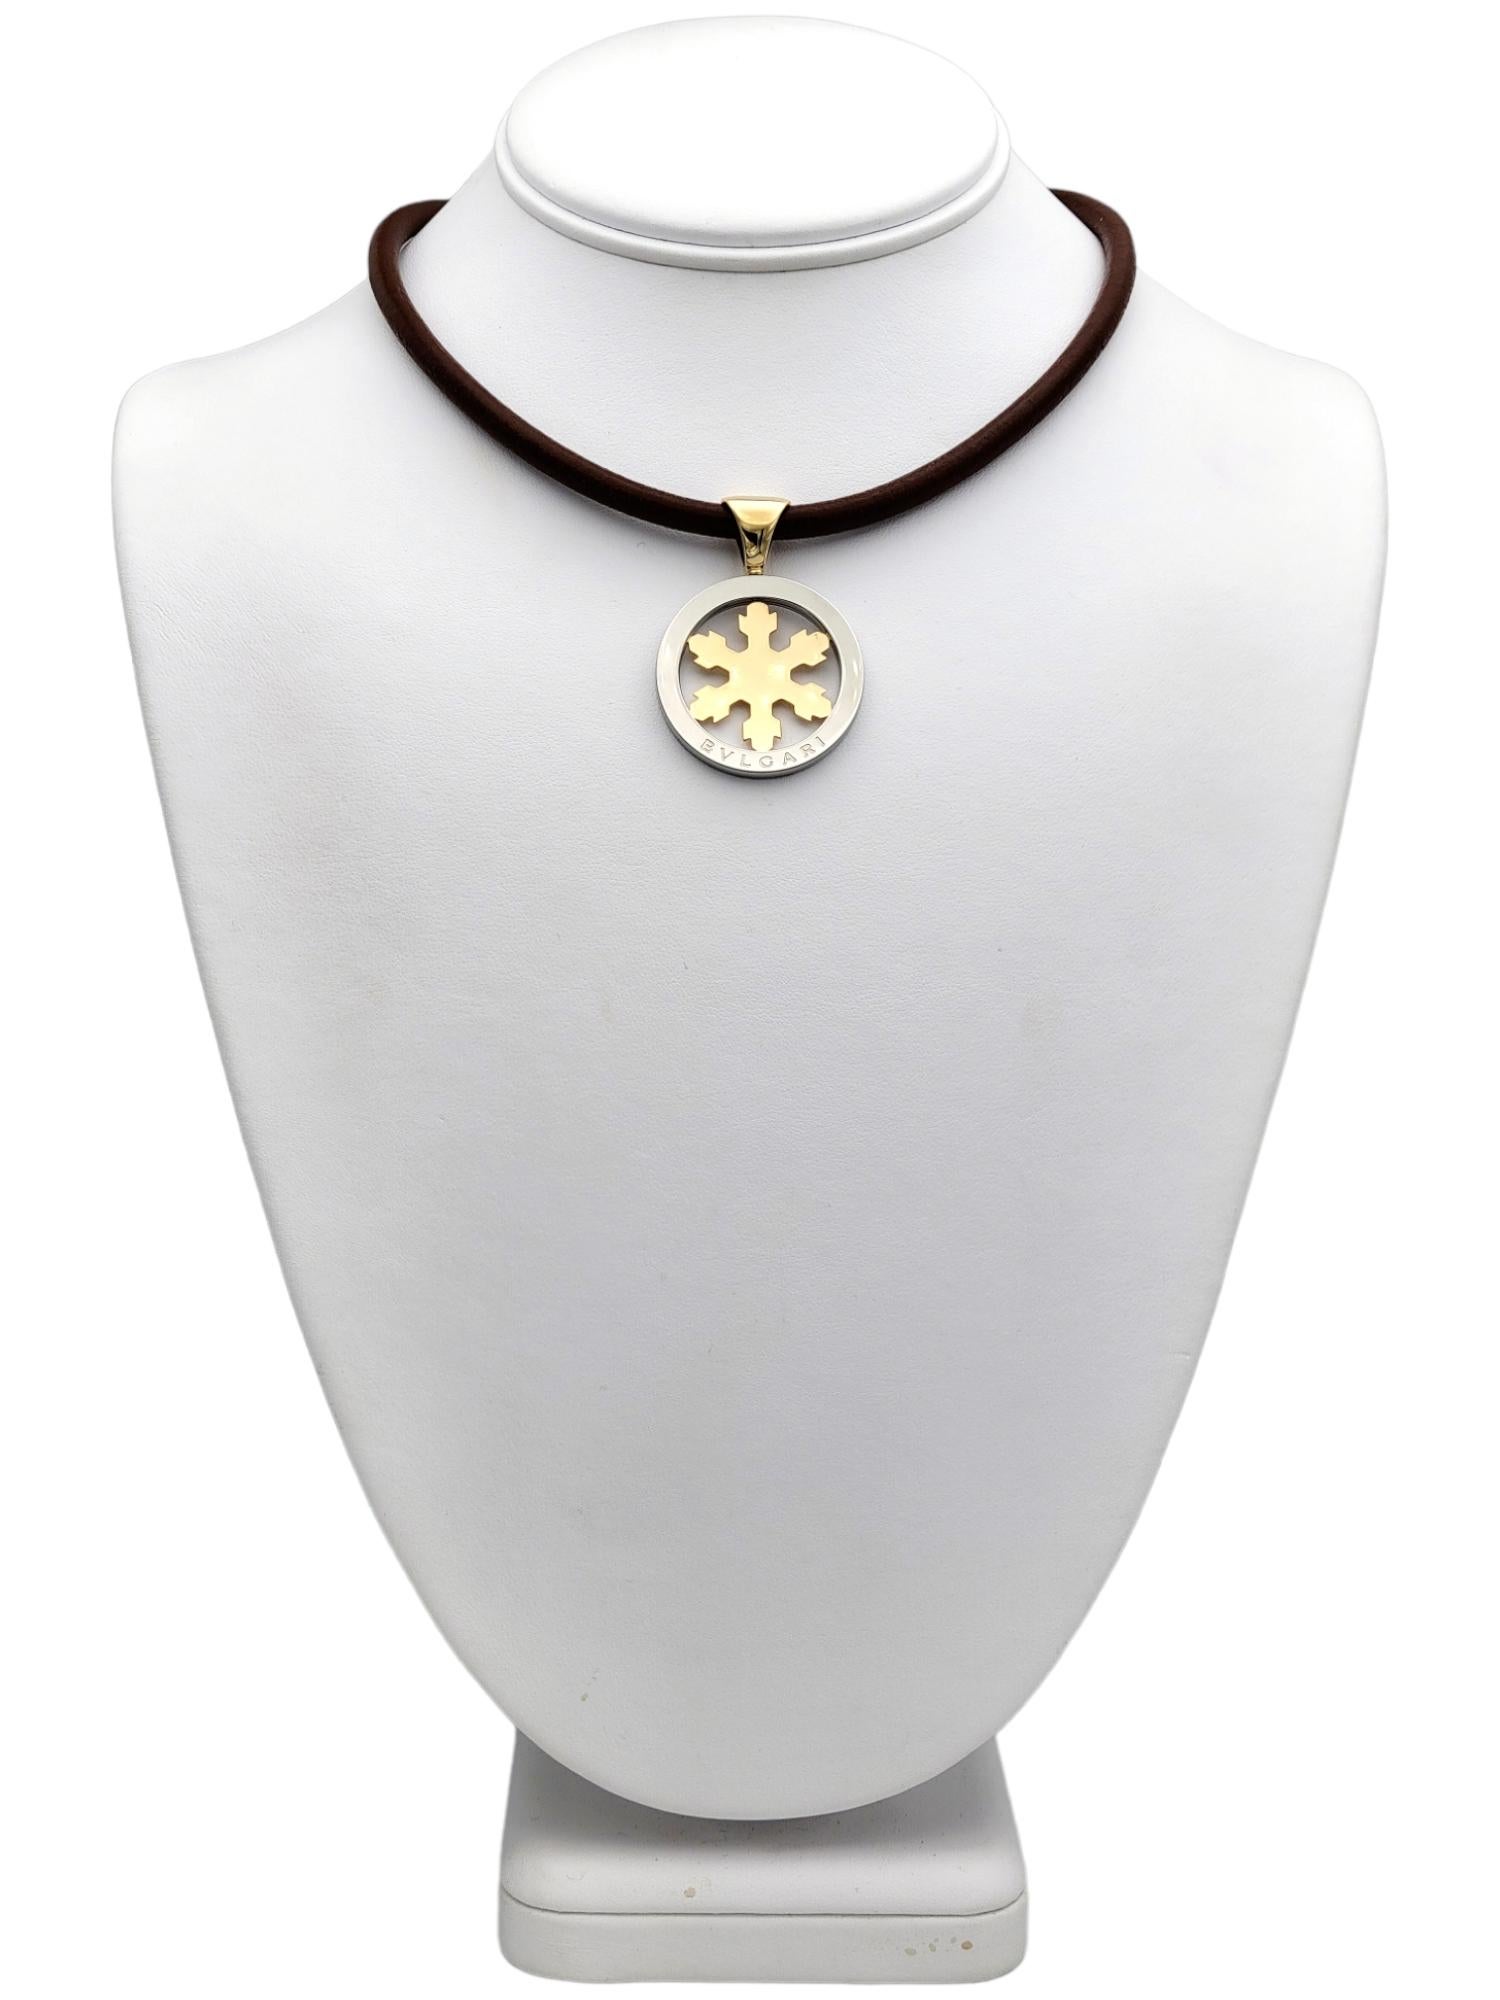 Bvlgari Tondo Snowflake Leather Necklace in 18k Yellow Gold & Stainless Steel 5